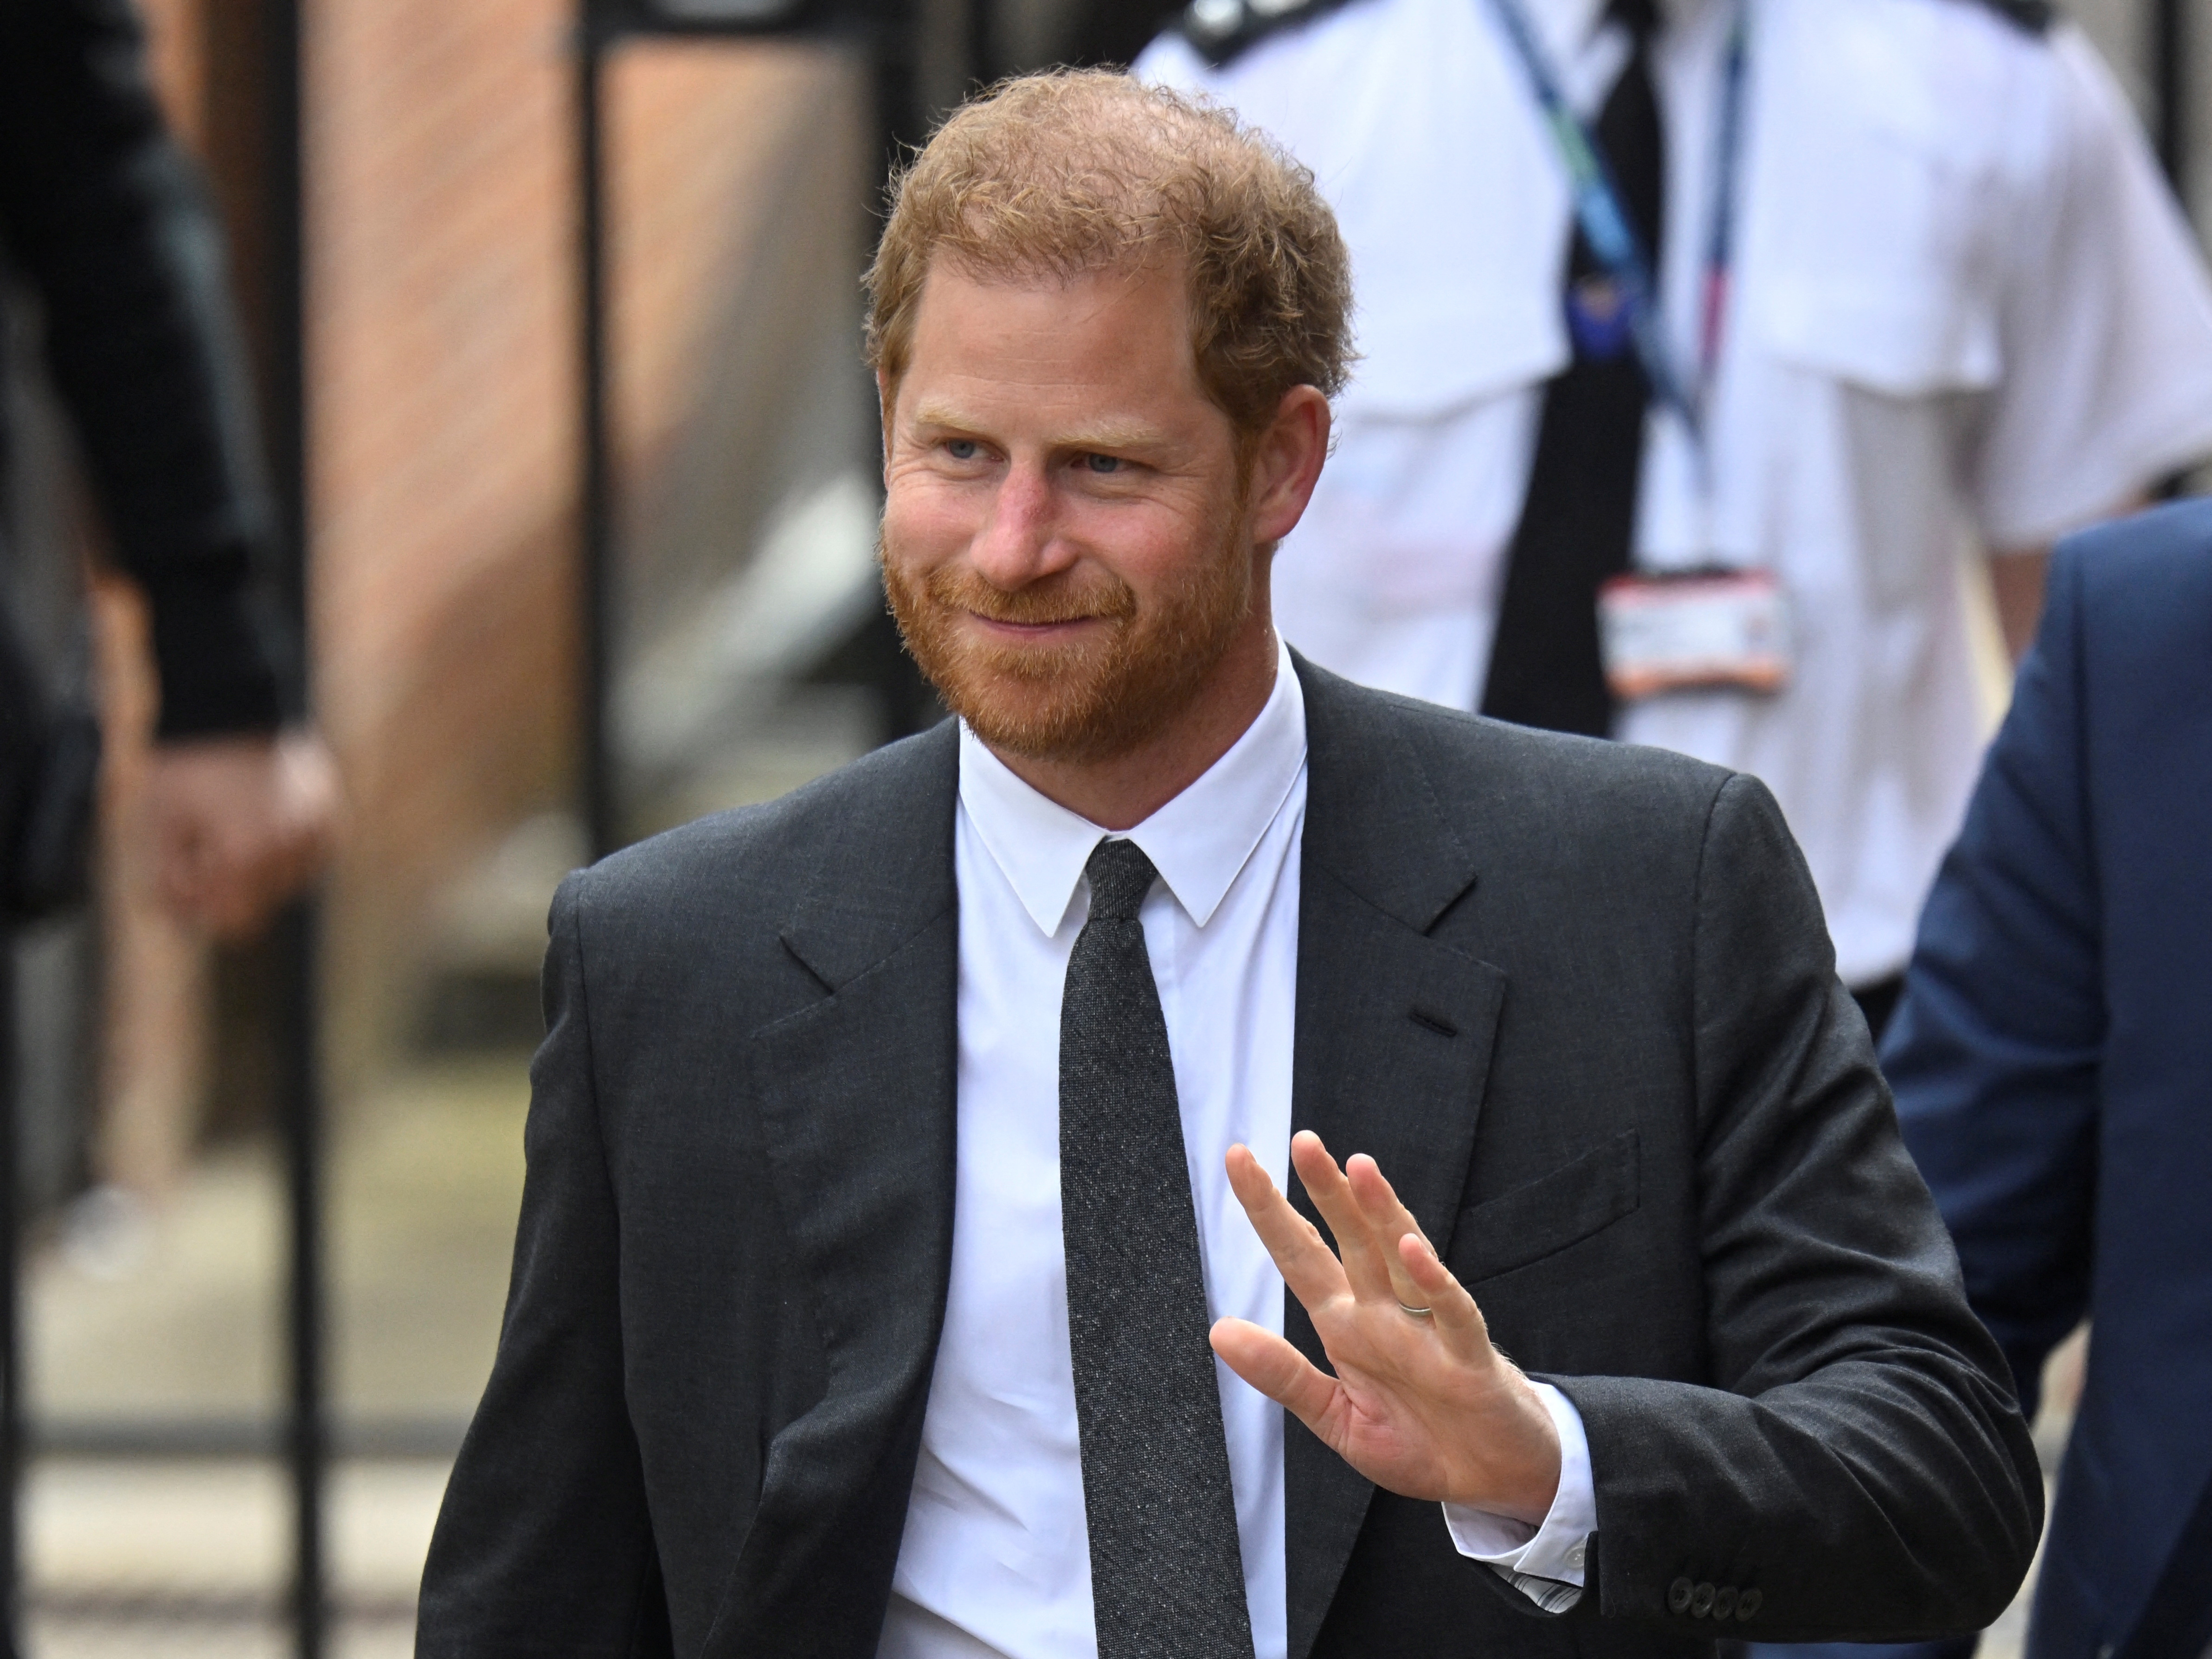 UK paper group bids to throw out Prince Harry and others' privacy lawsuits